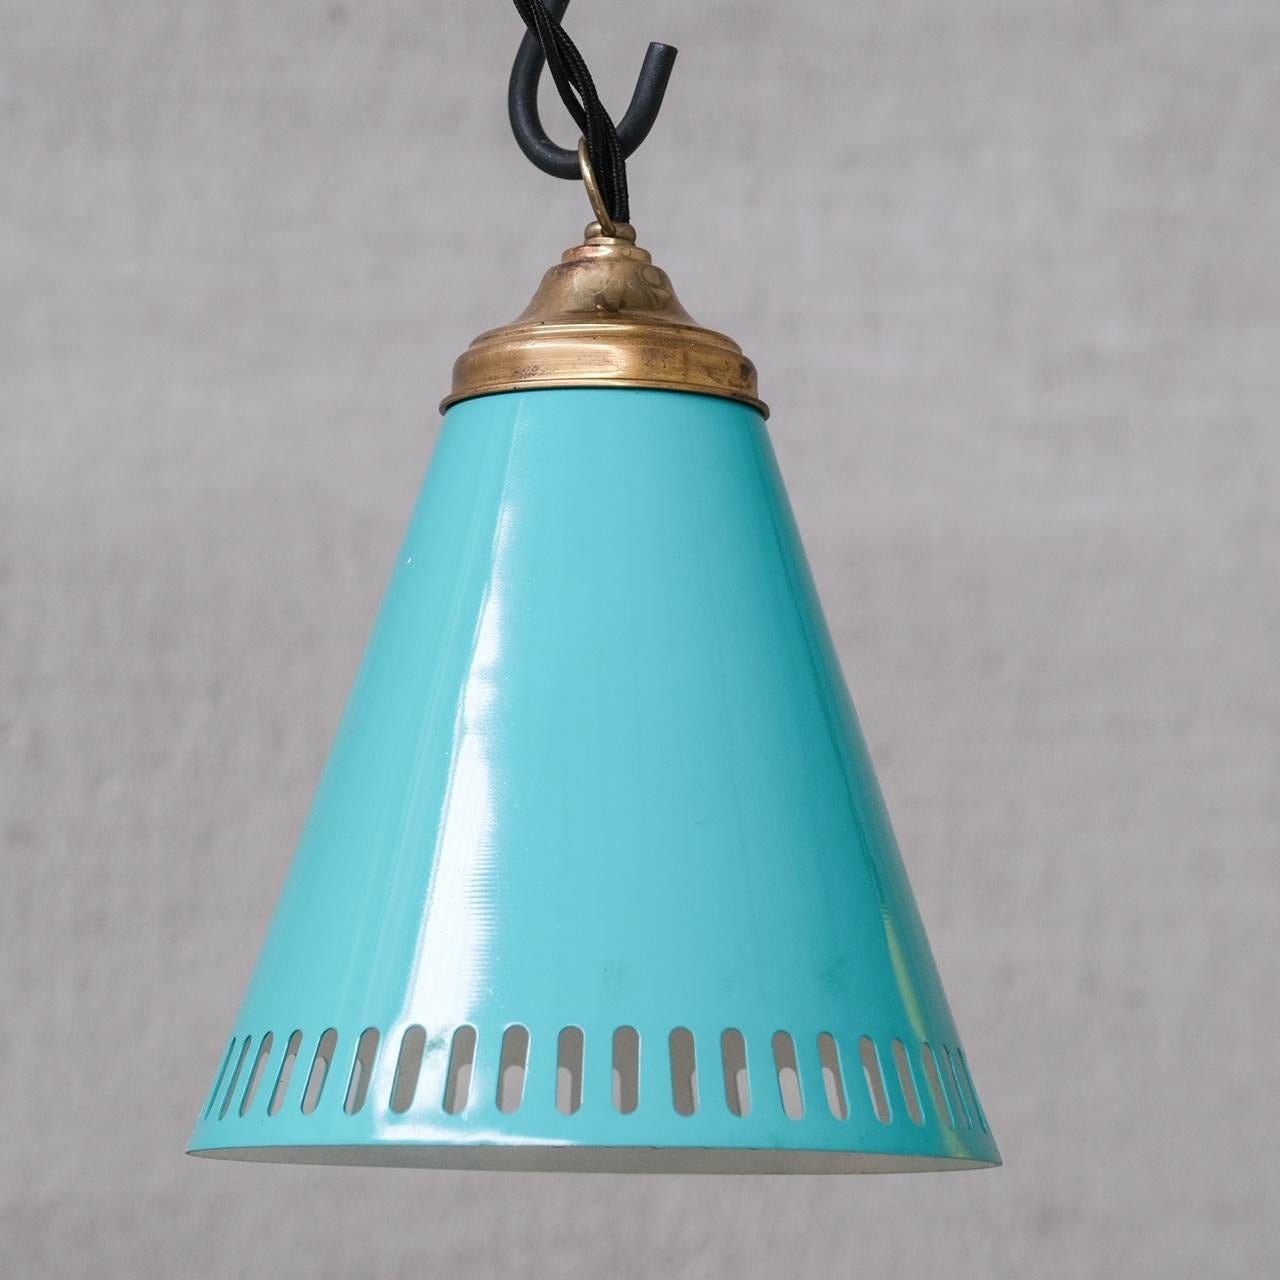 New Old Stock Mid-Century Metal Pendant Shade Lights (6 available) For Sale 1